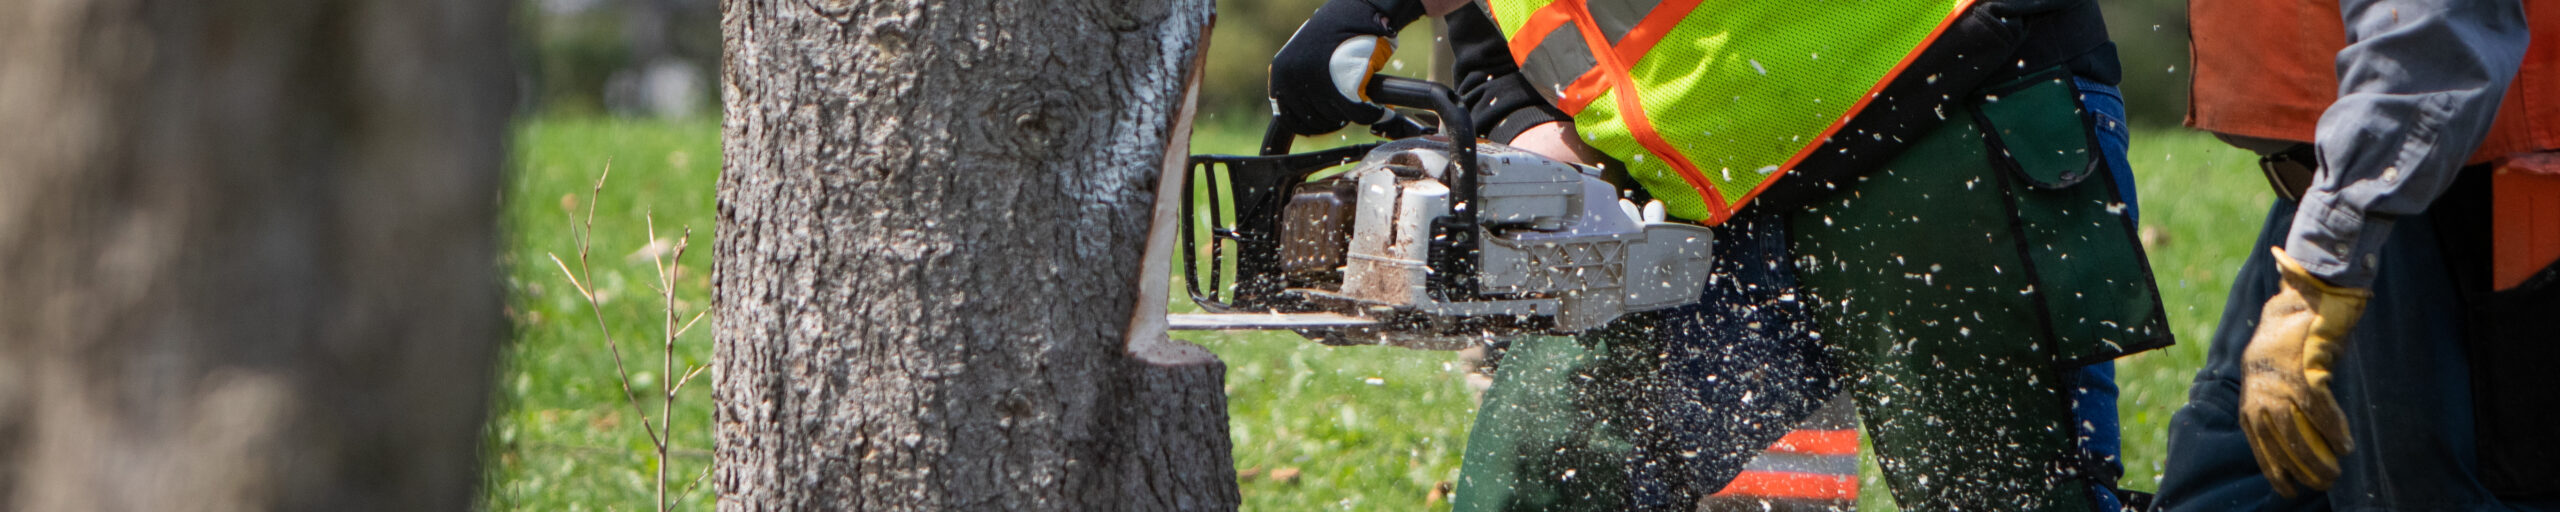 Man cutting a tree down with a chainsaw